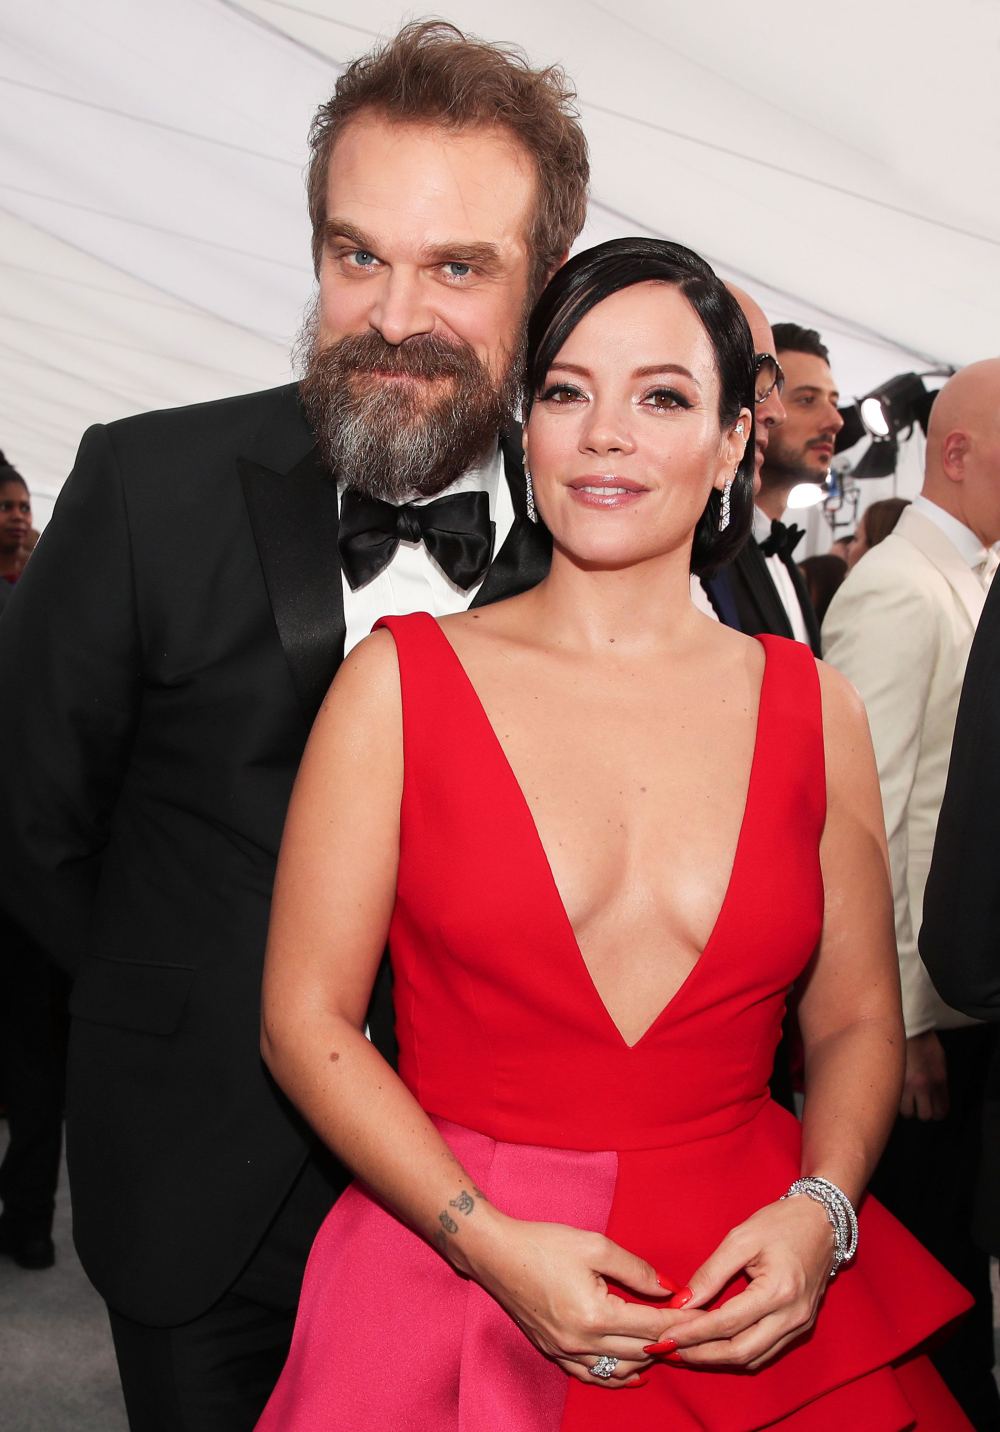 Lily Allen Reveals She Wants Kids With Husband David Harbour 1 Month After Wedding